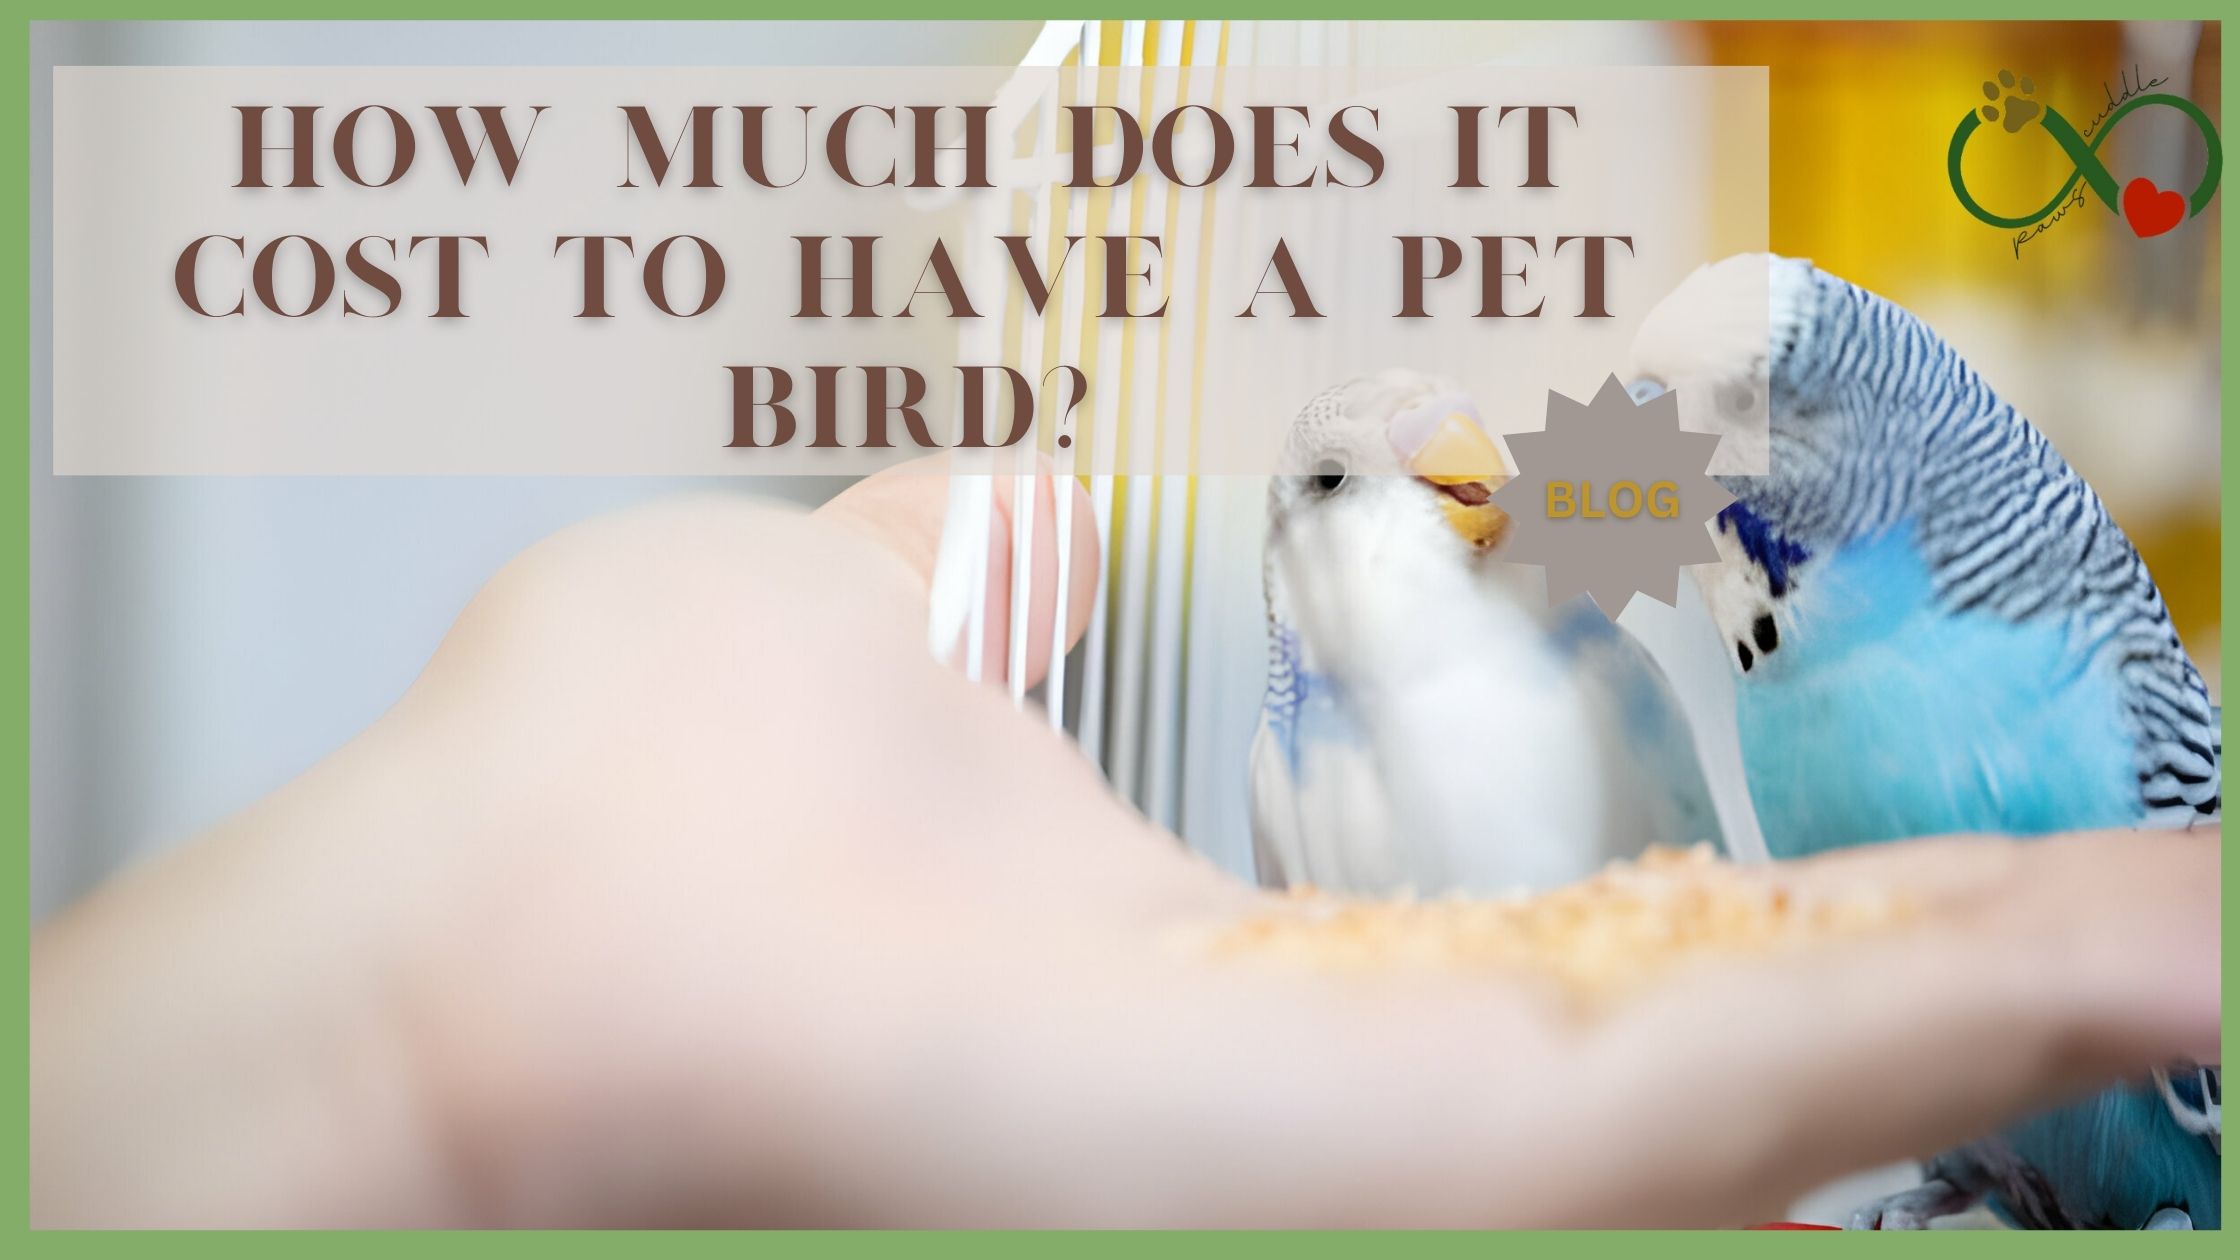 How much does it cost to have a pet bird?